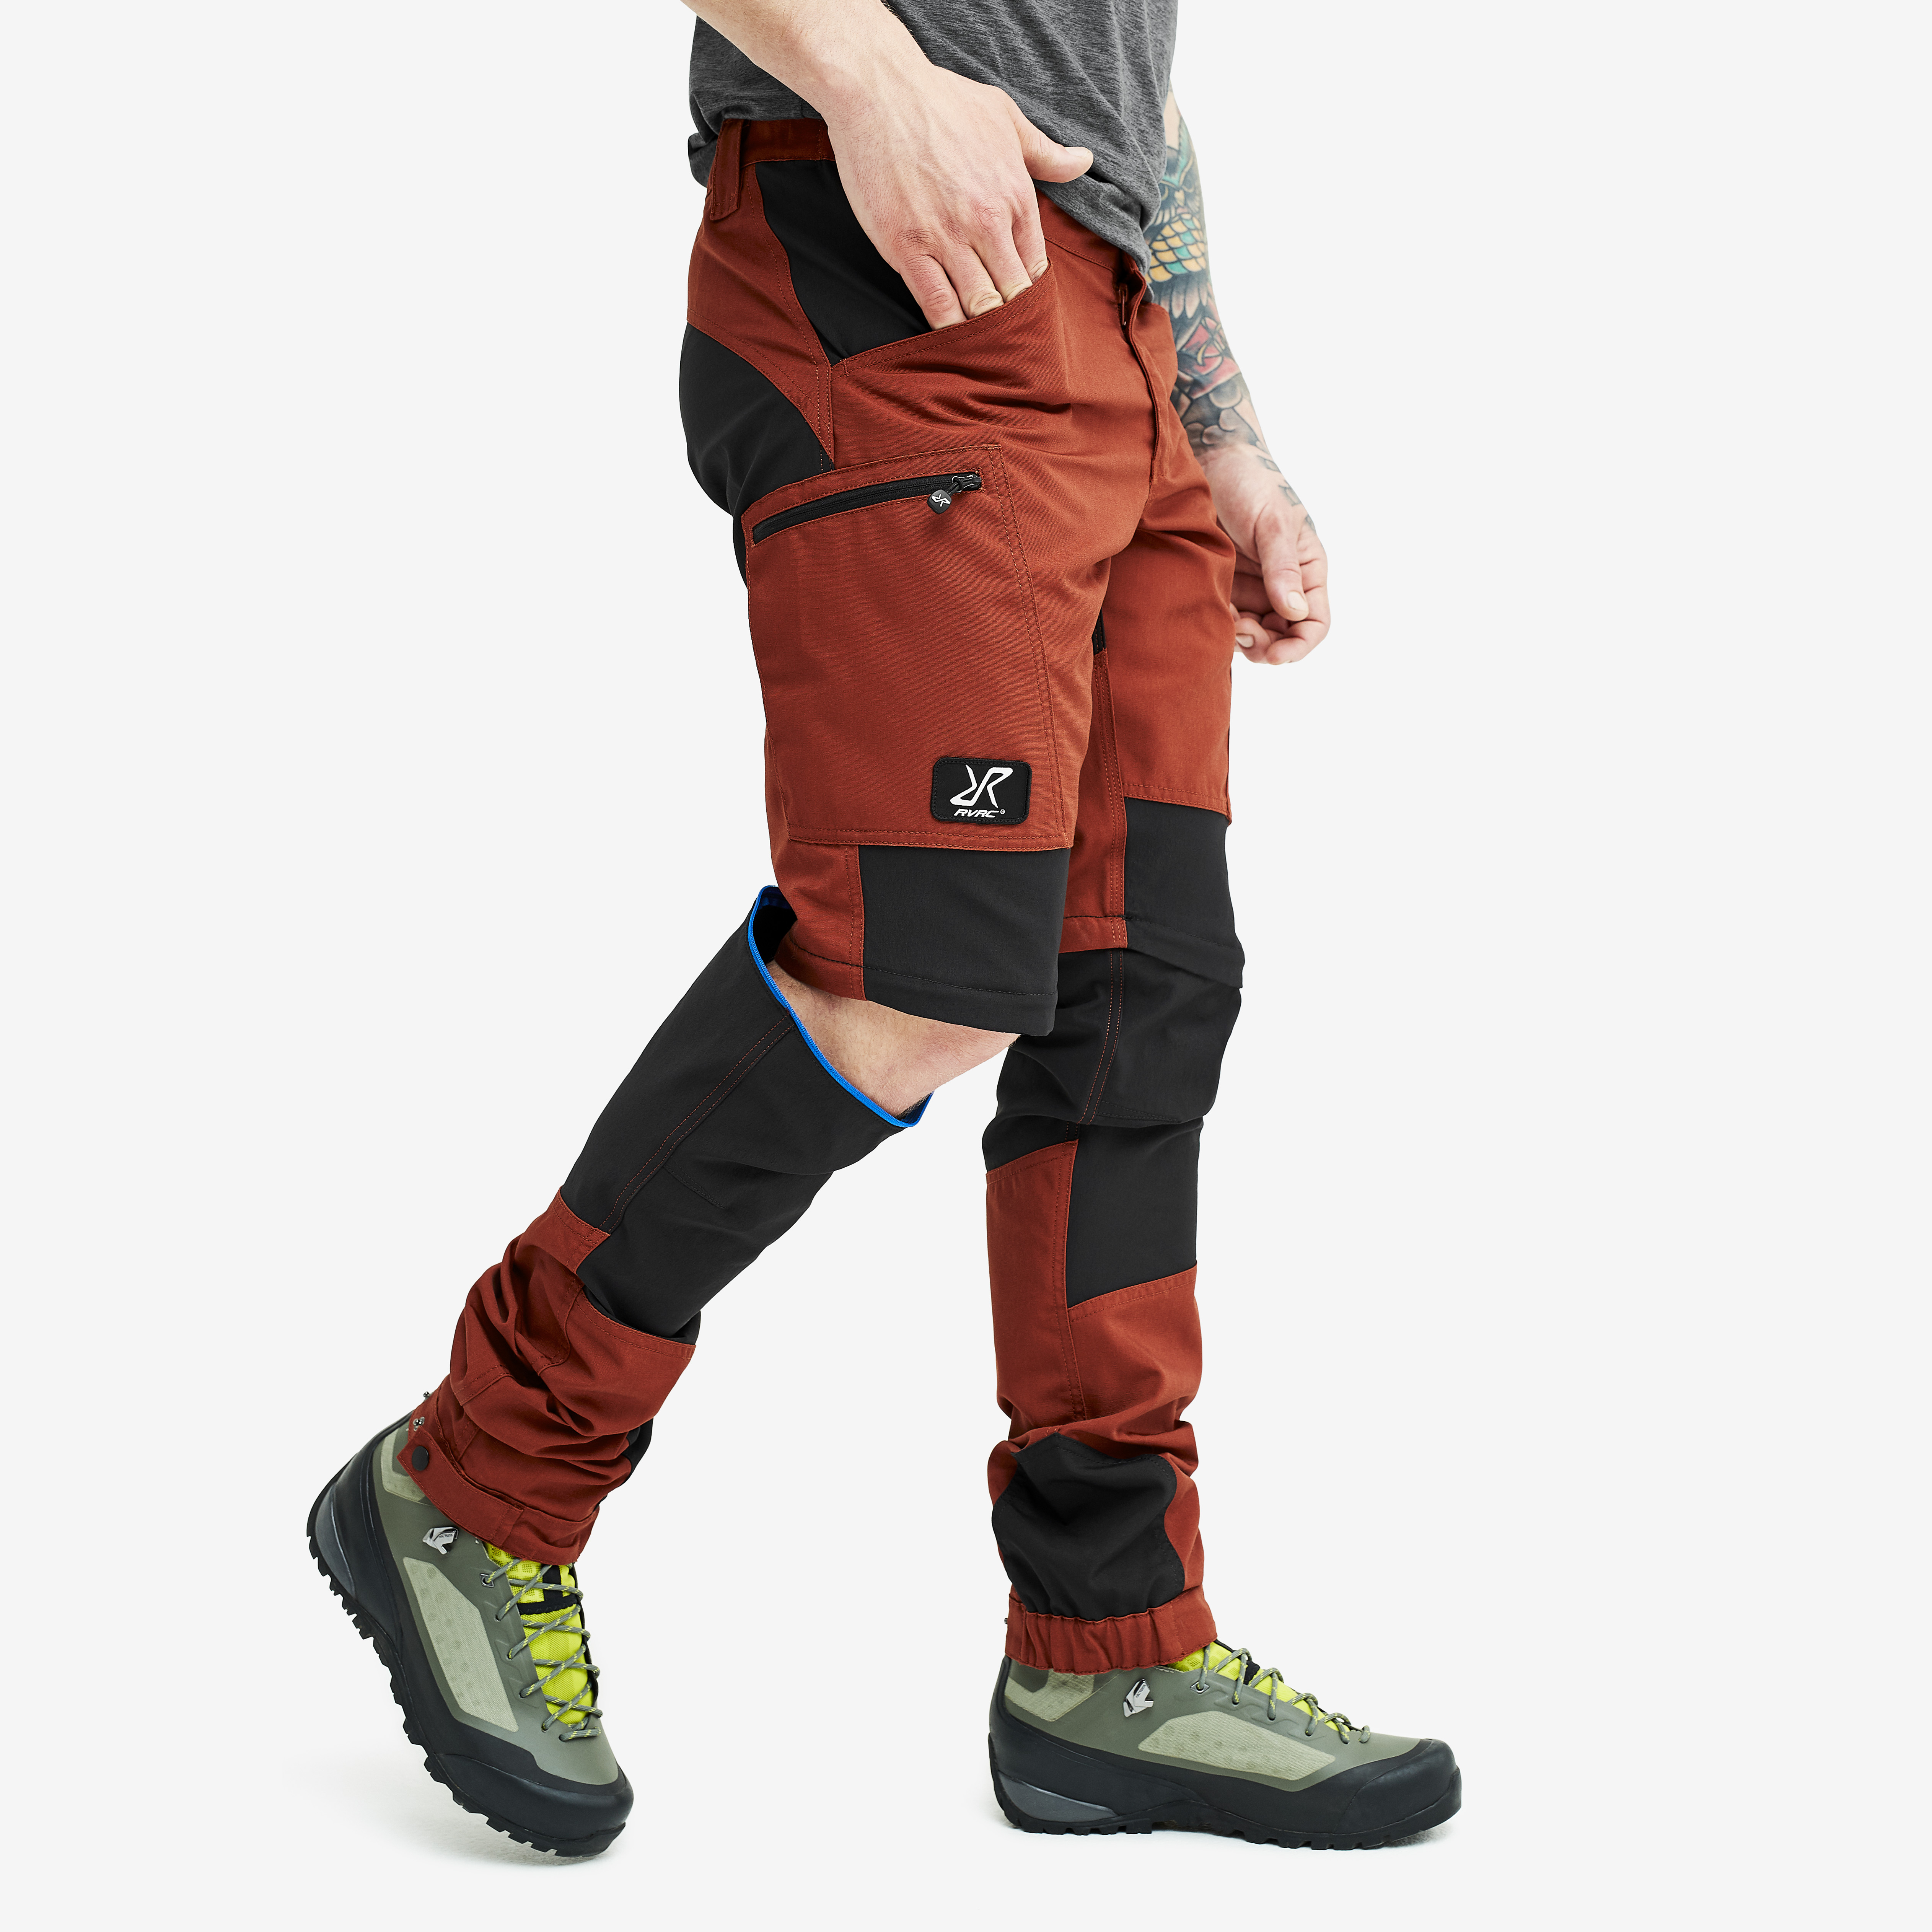 Nordwand Pro Zip-off hiking pants for men in orange